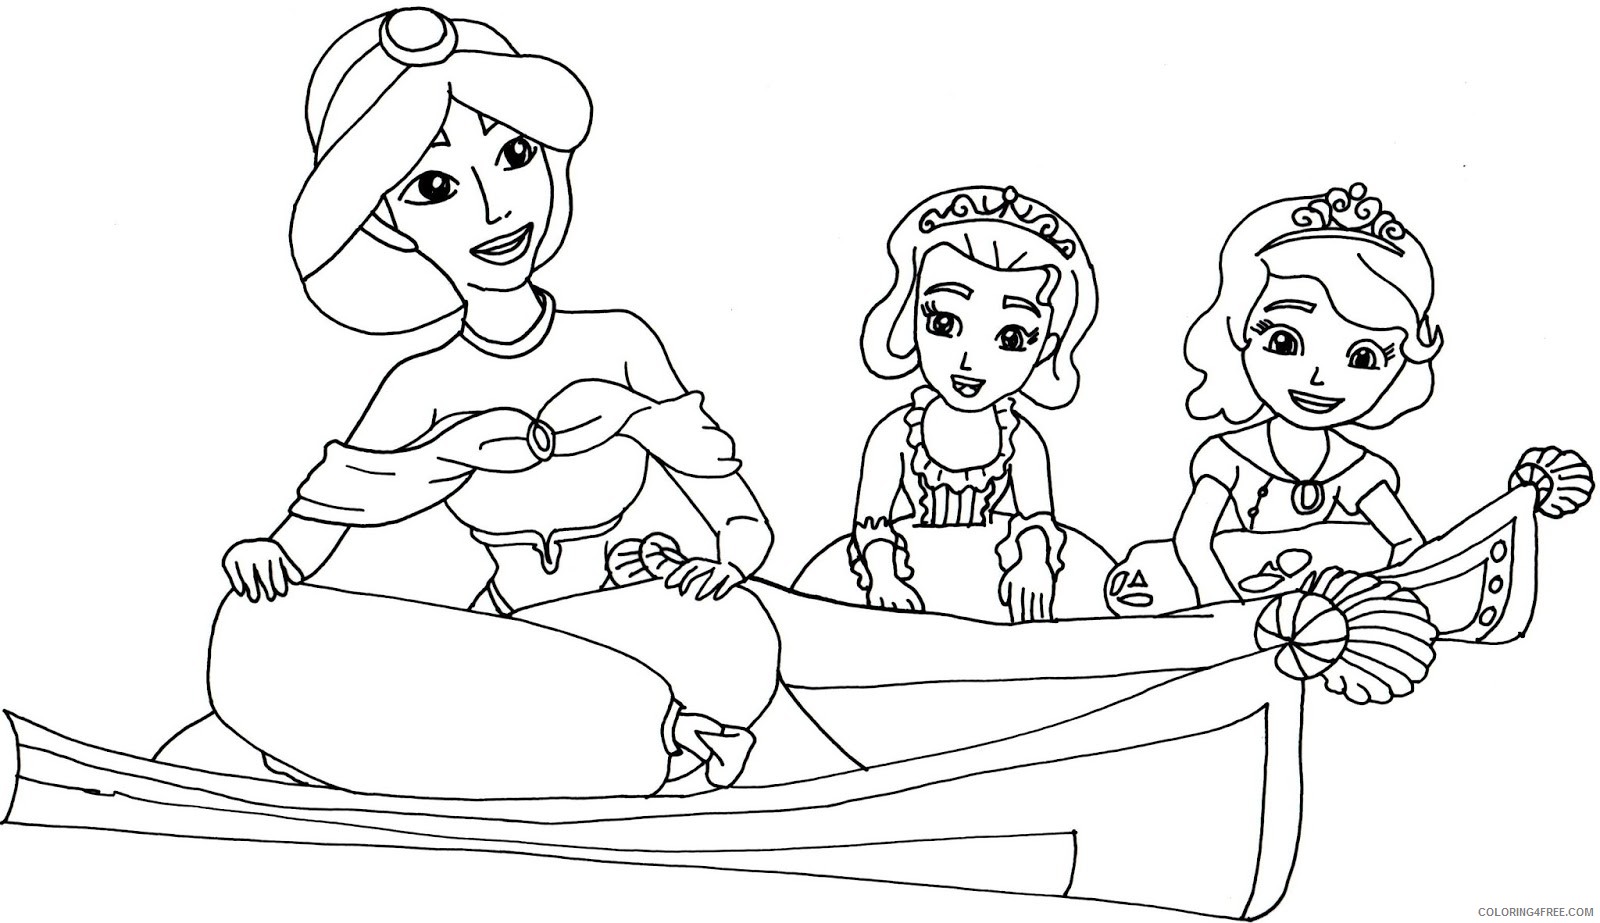 Sofia the First Coloring Pages Cartoons Jasmine Sofia the First Printable 2020 5835 Coloring4free